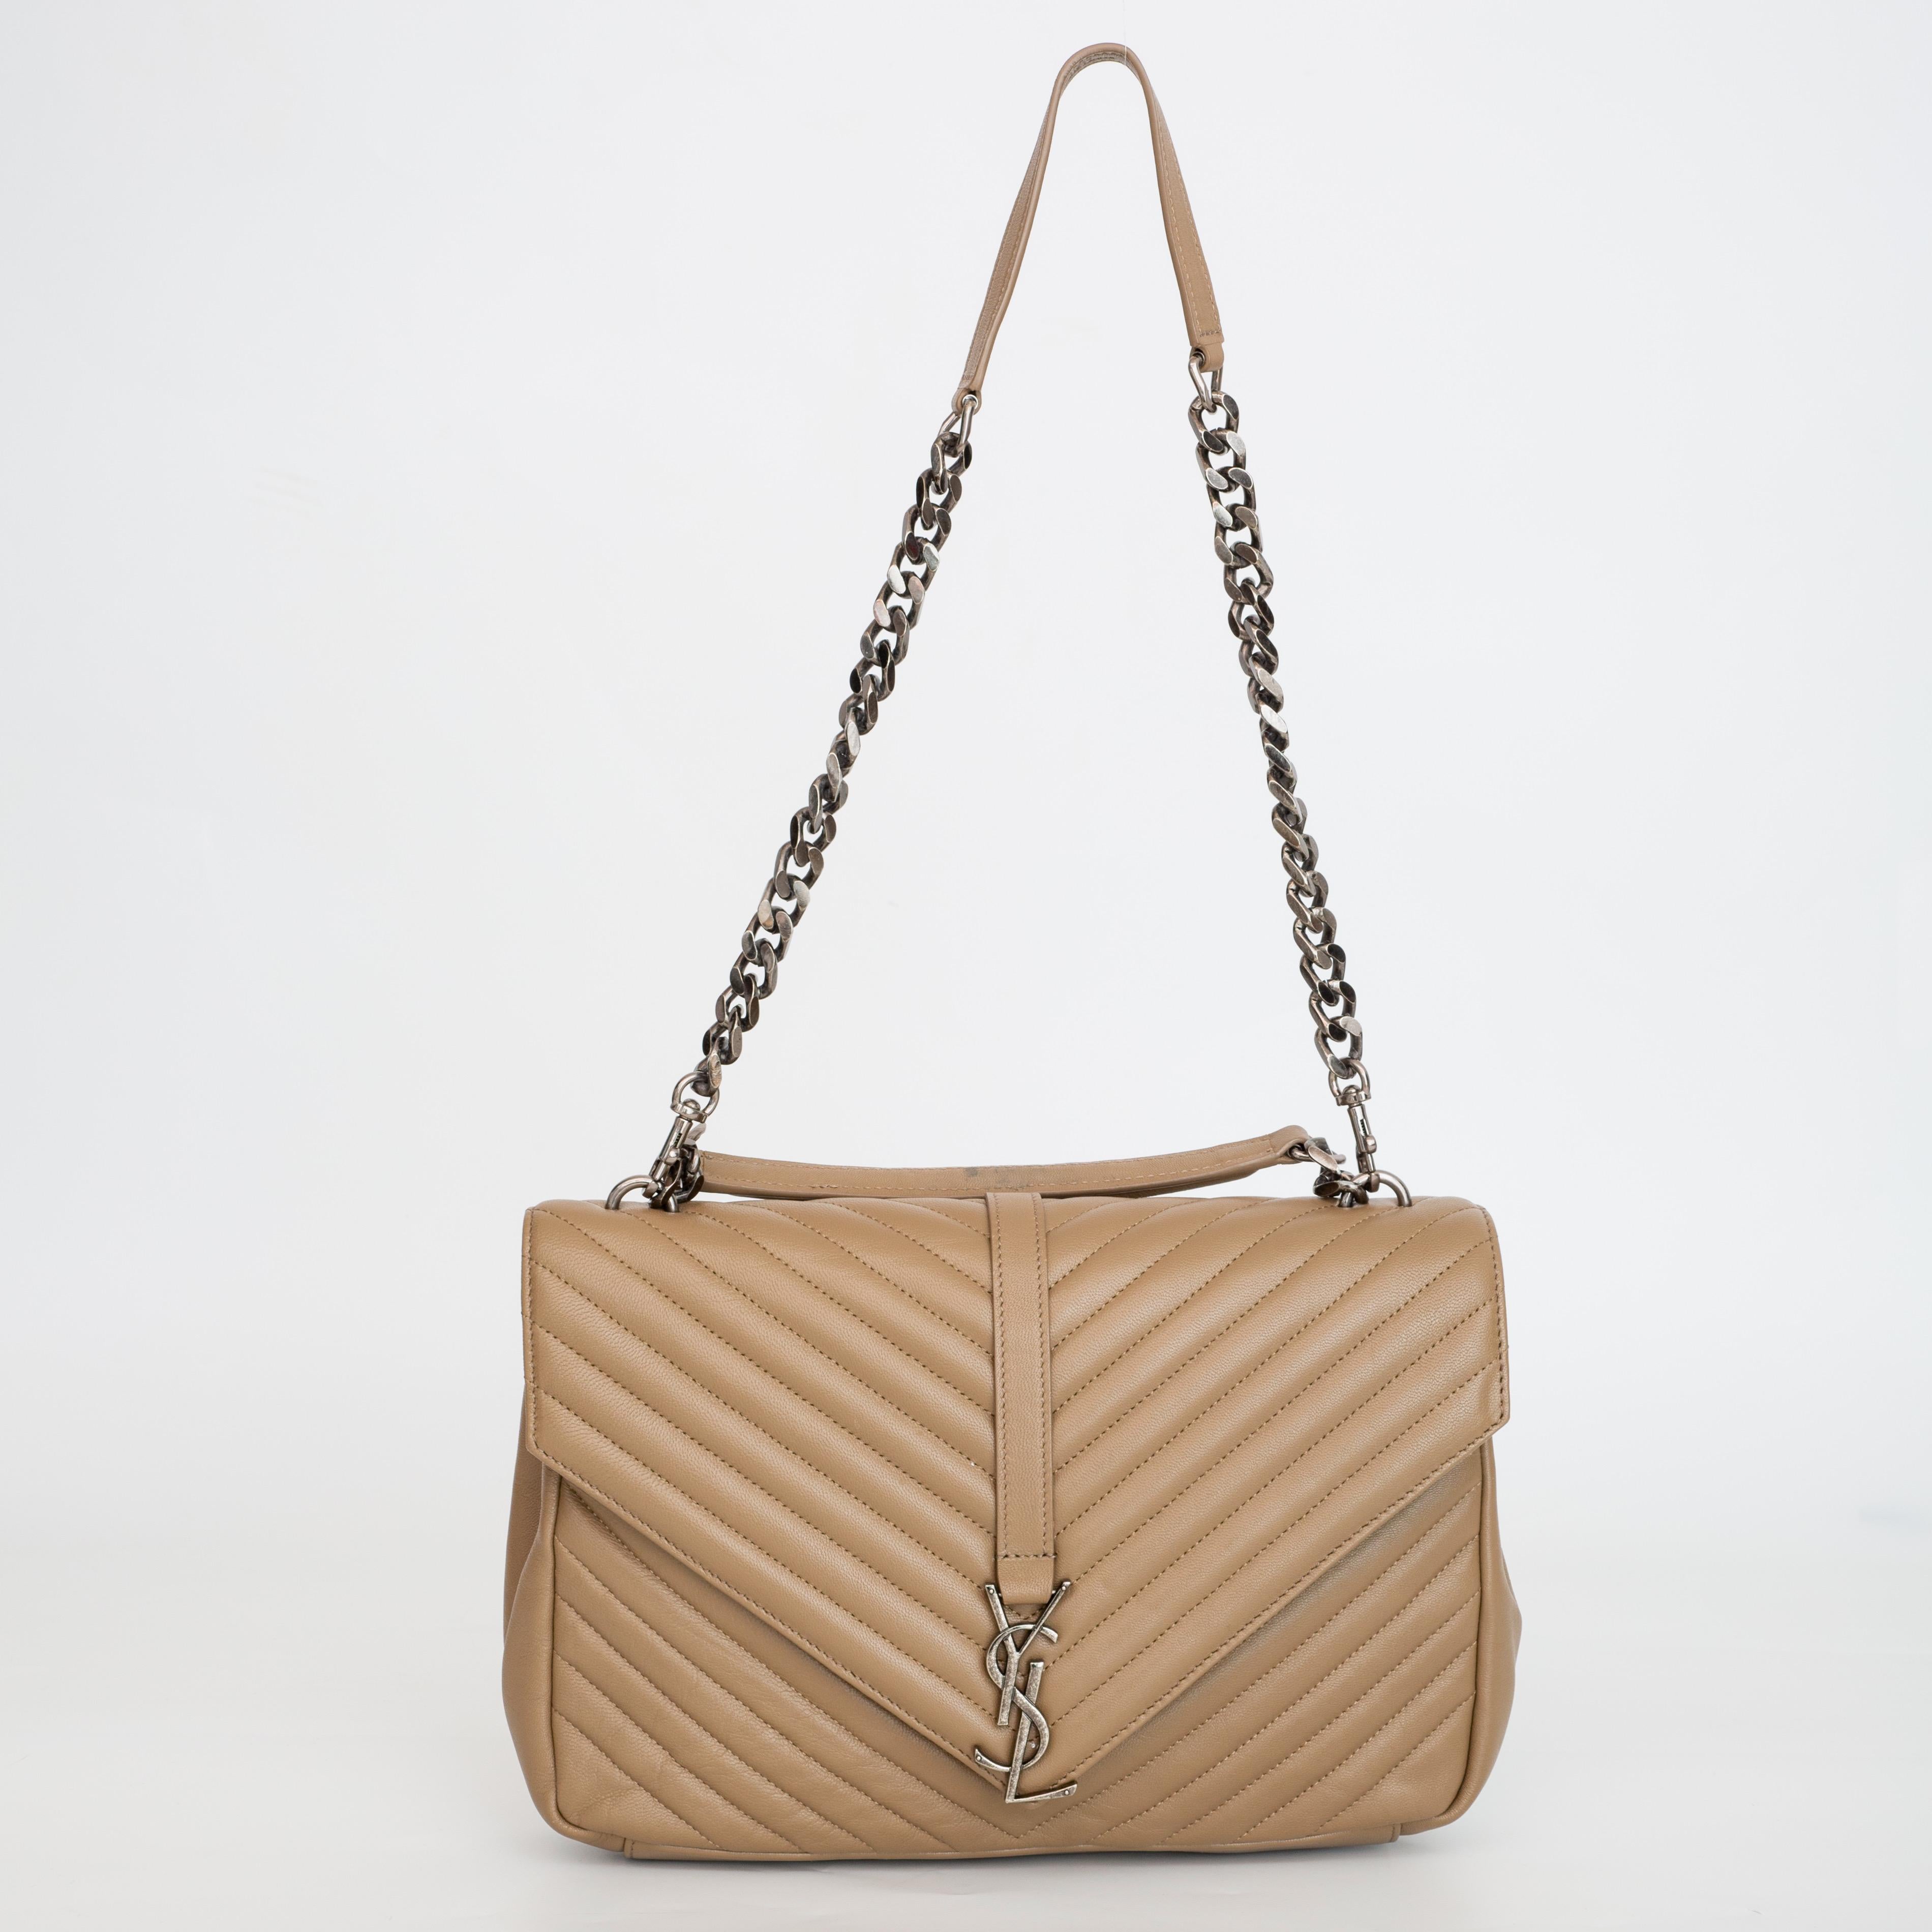 This tote features chevron quilting in beige. The shoulder straps feature leather shoulder pads and polished brass-tone chains. The front features an aged sliver YSL monogram strap and opens to a black fabric interior with a zip pocket.

COLOR: